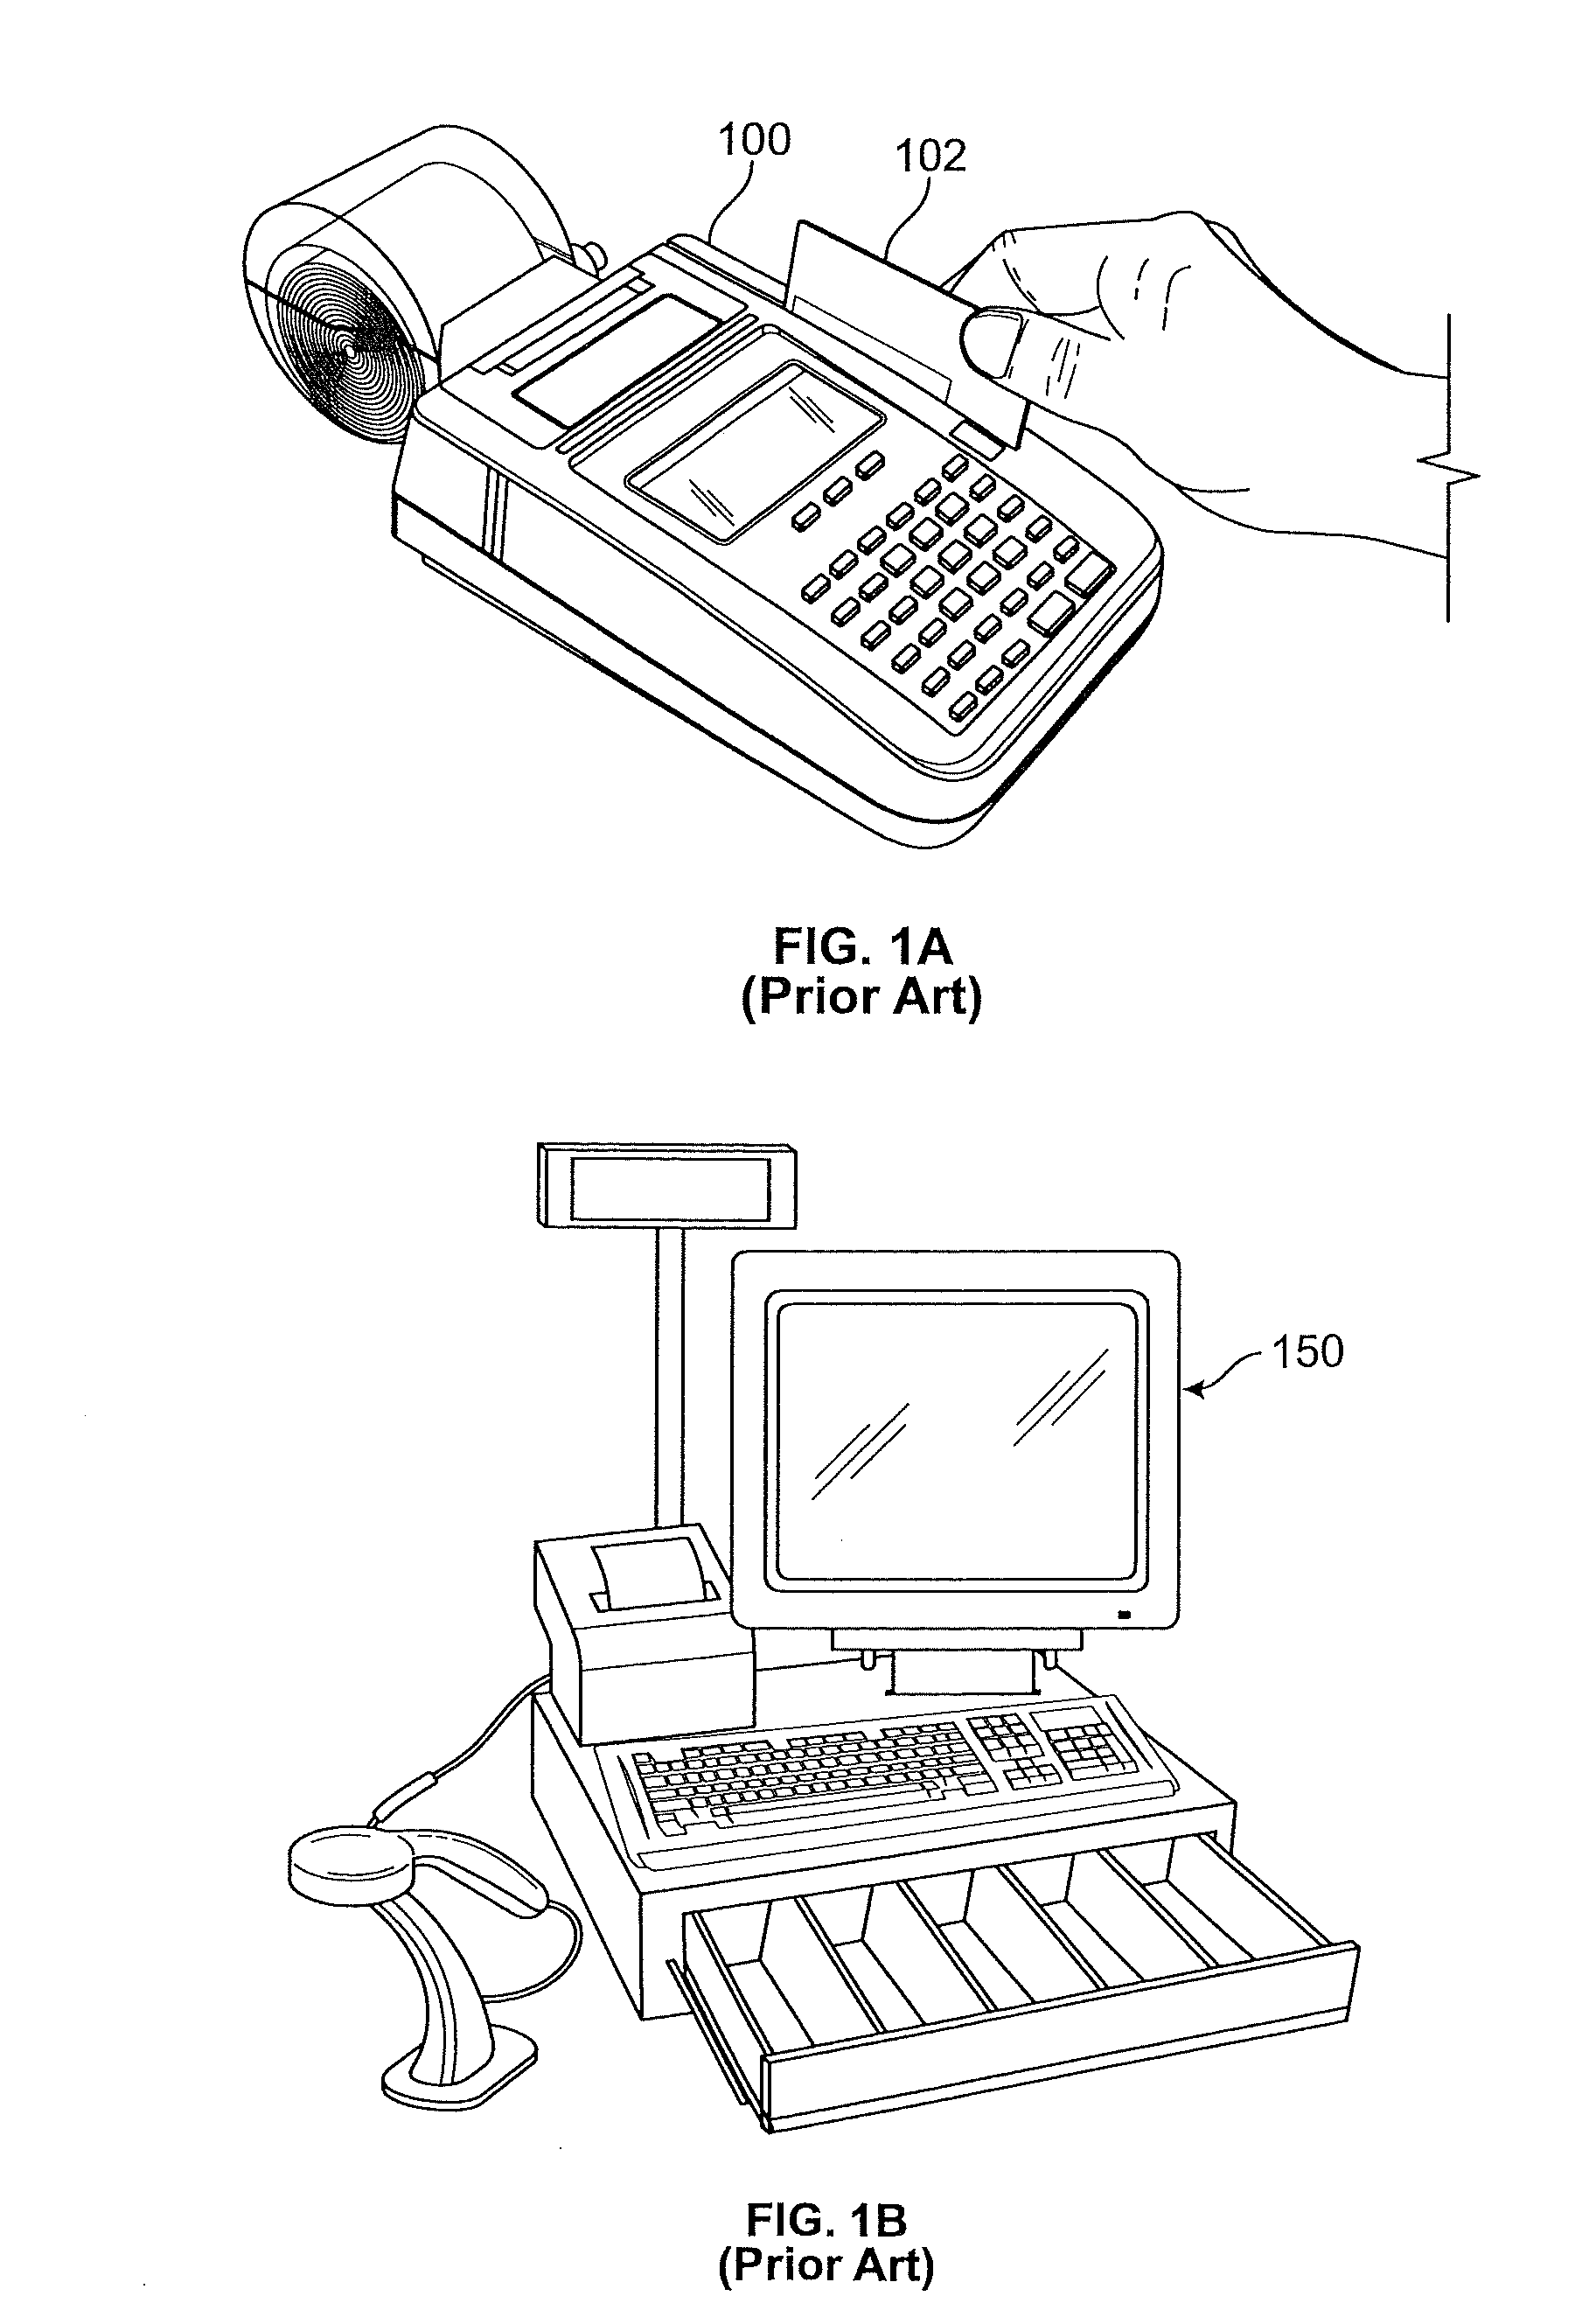 Real-Time Multi-Merchant Multi-Payer Multi-Bucket Open Loop Debit Card, Credit Card or Mobile Payment Device Value Tracking and Discount Processing Systems and Related Methods